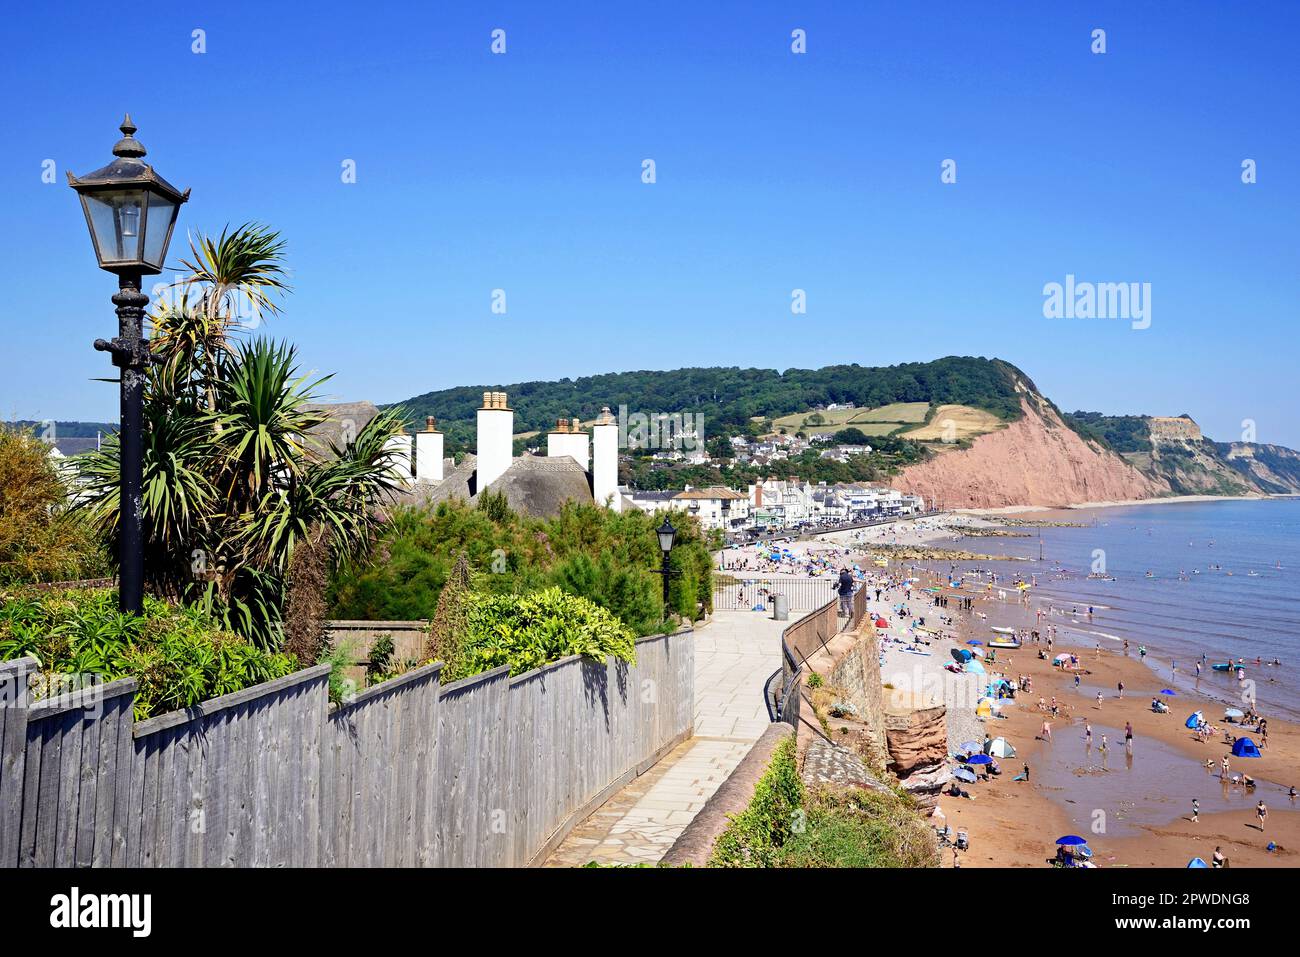 Elevated view along the beach with views of the town and Pennington Point cliffs seen from Jacobs Ladder, Sidmouth, Devon, UK. Stock Photo